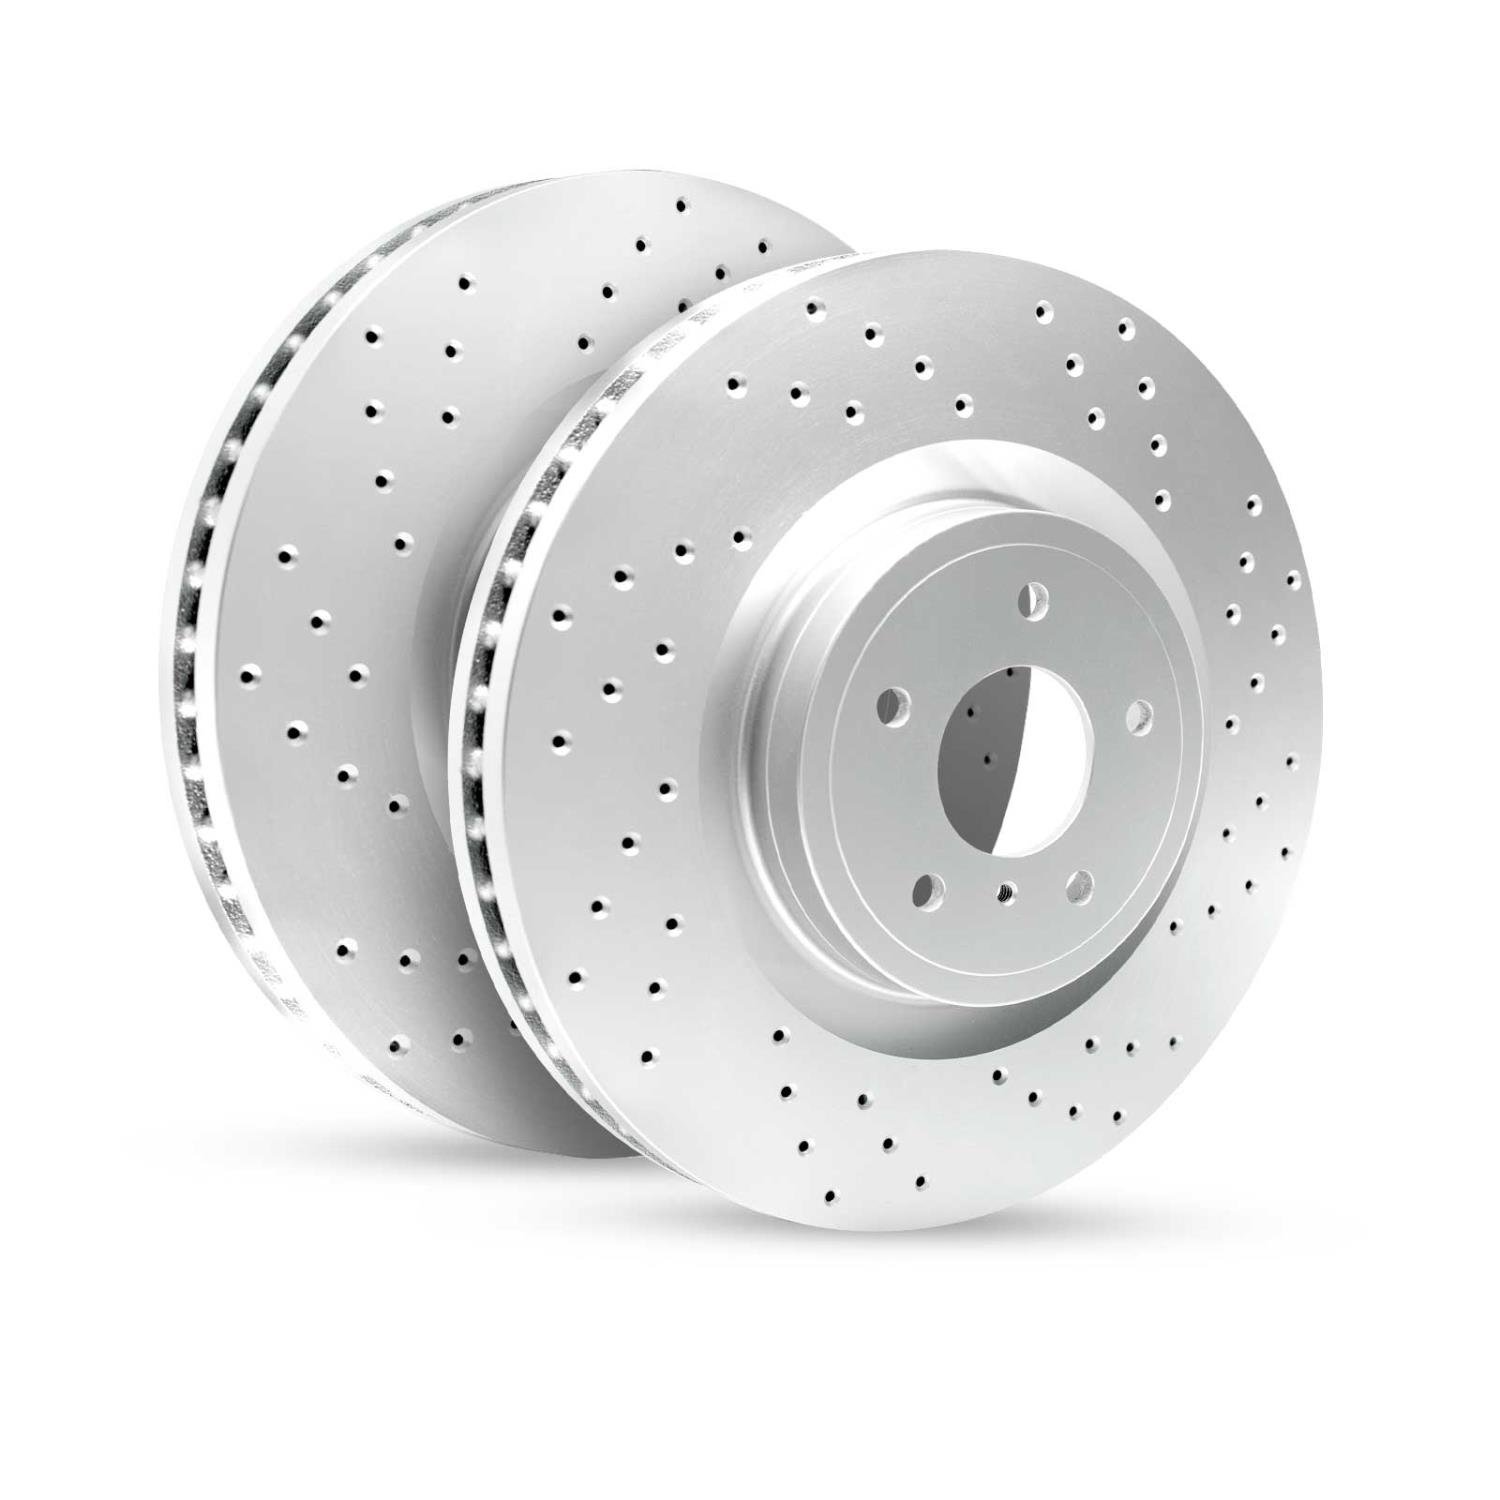 GEO-Carbon Drilled/Slotted Rotors, Fits Select Multiple